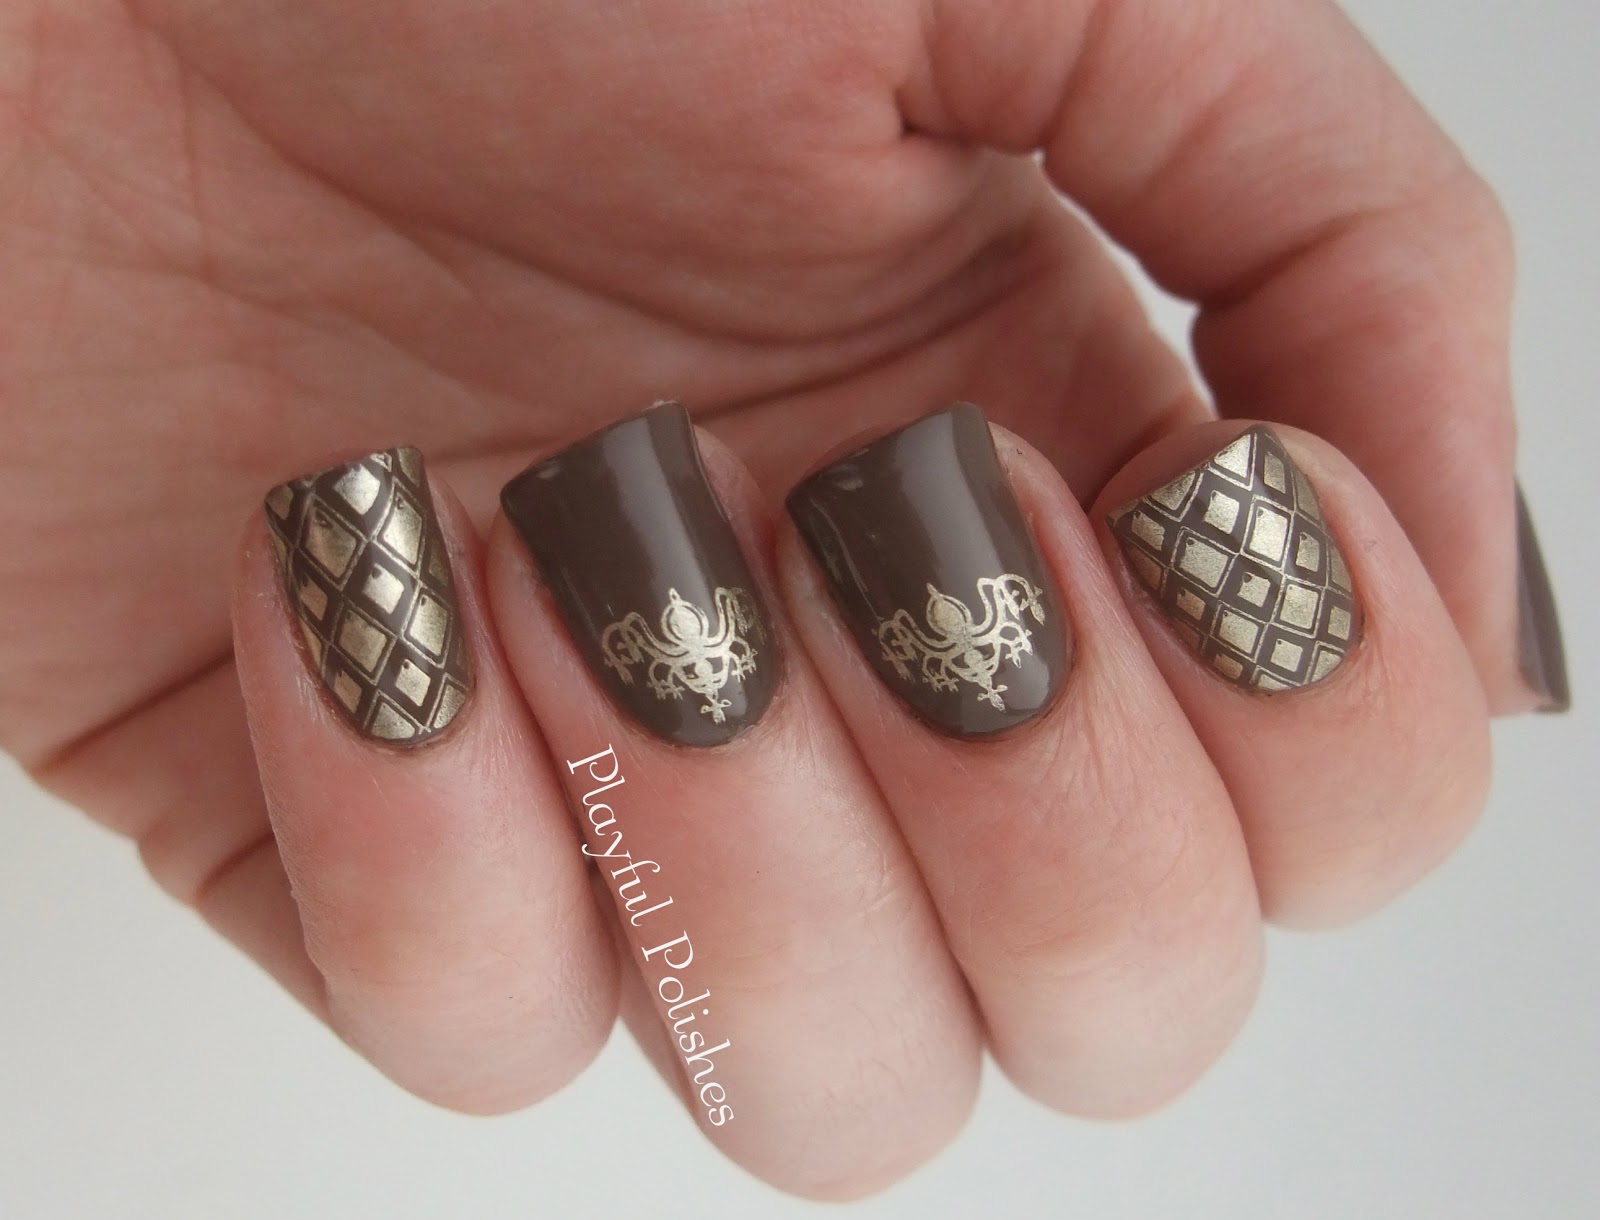 January Nail Designs - wide 2